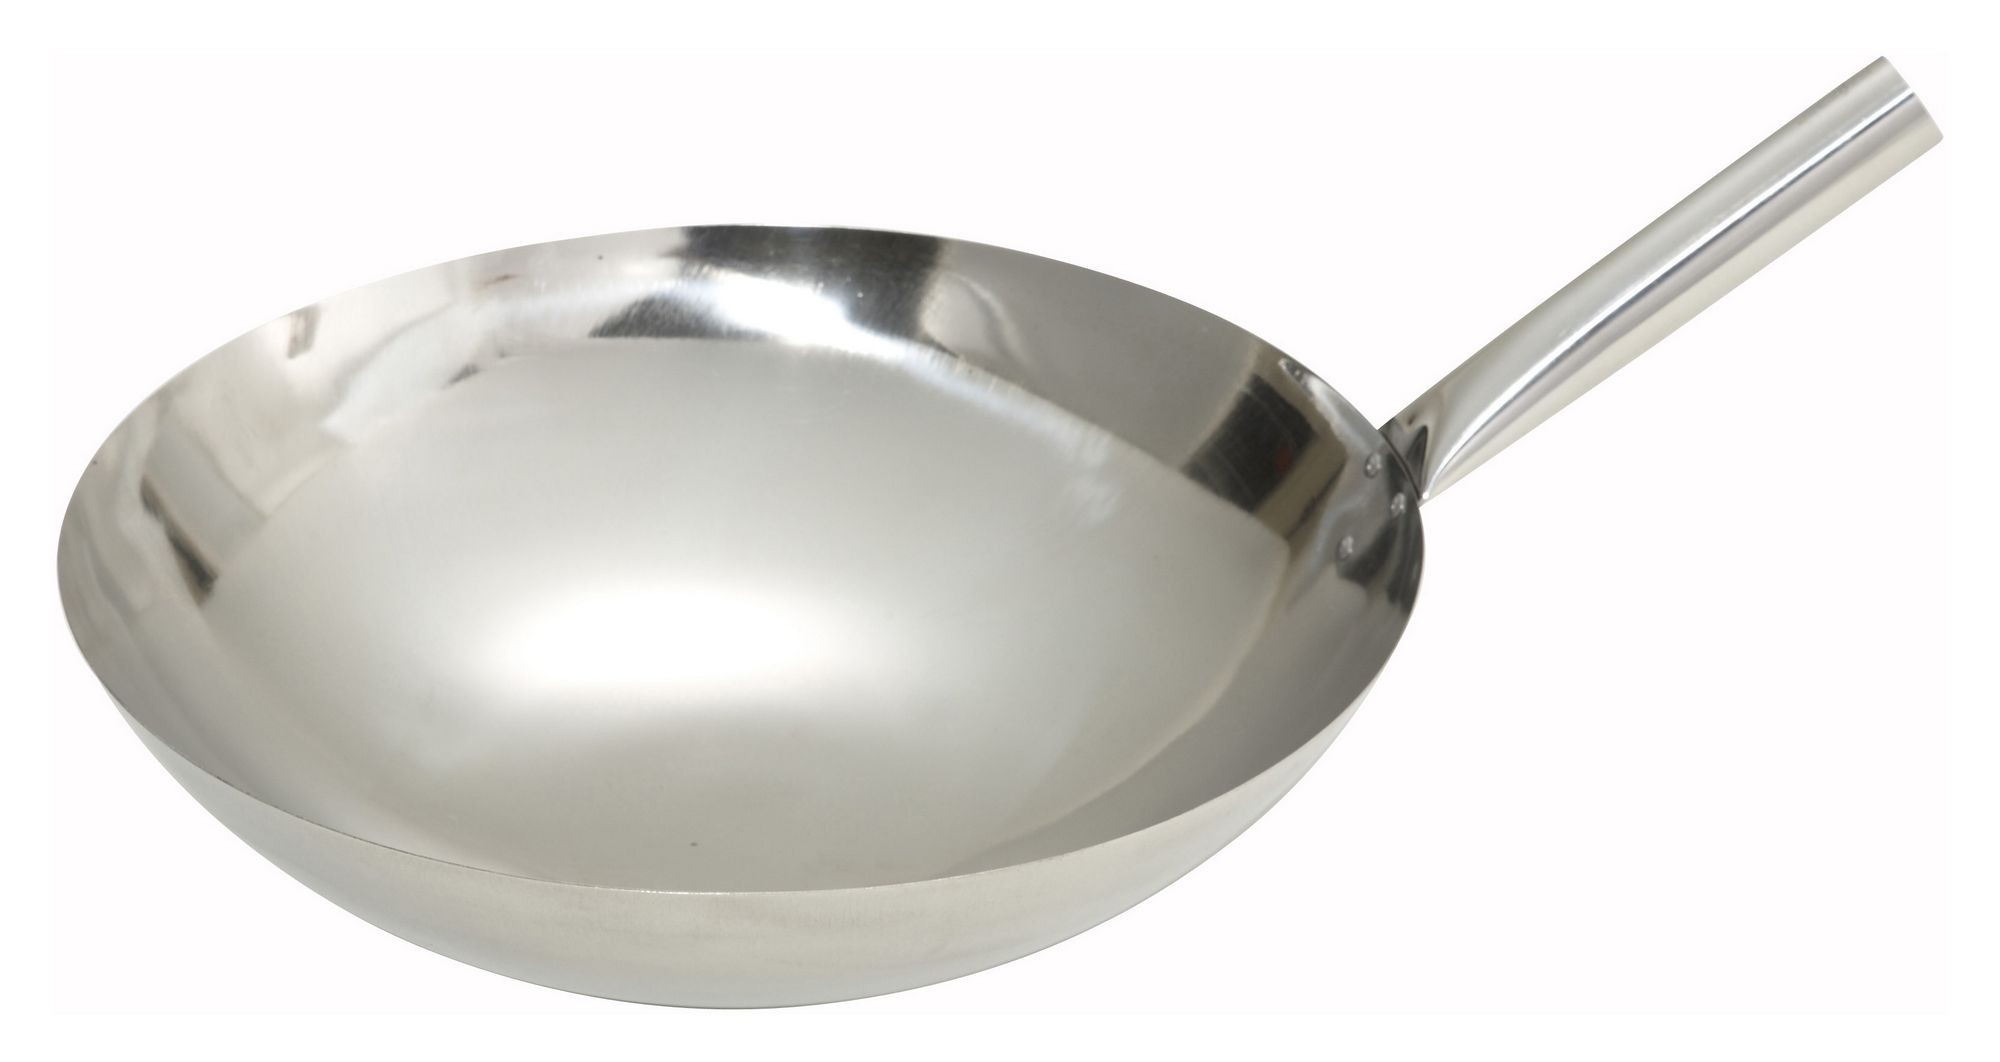 Winco WOK-14N Stainless Steel Chinese Wok with Riveted Joint 14"